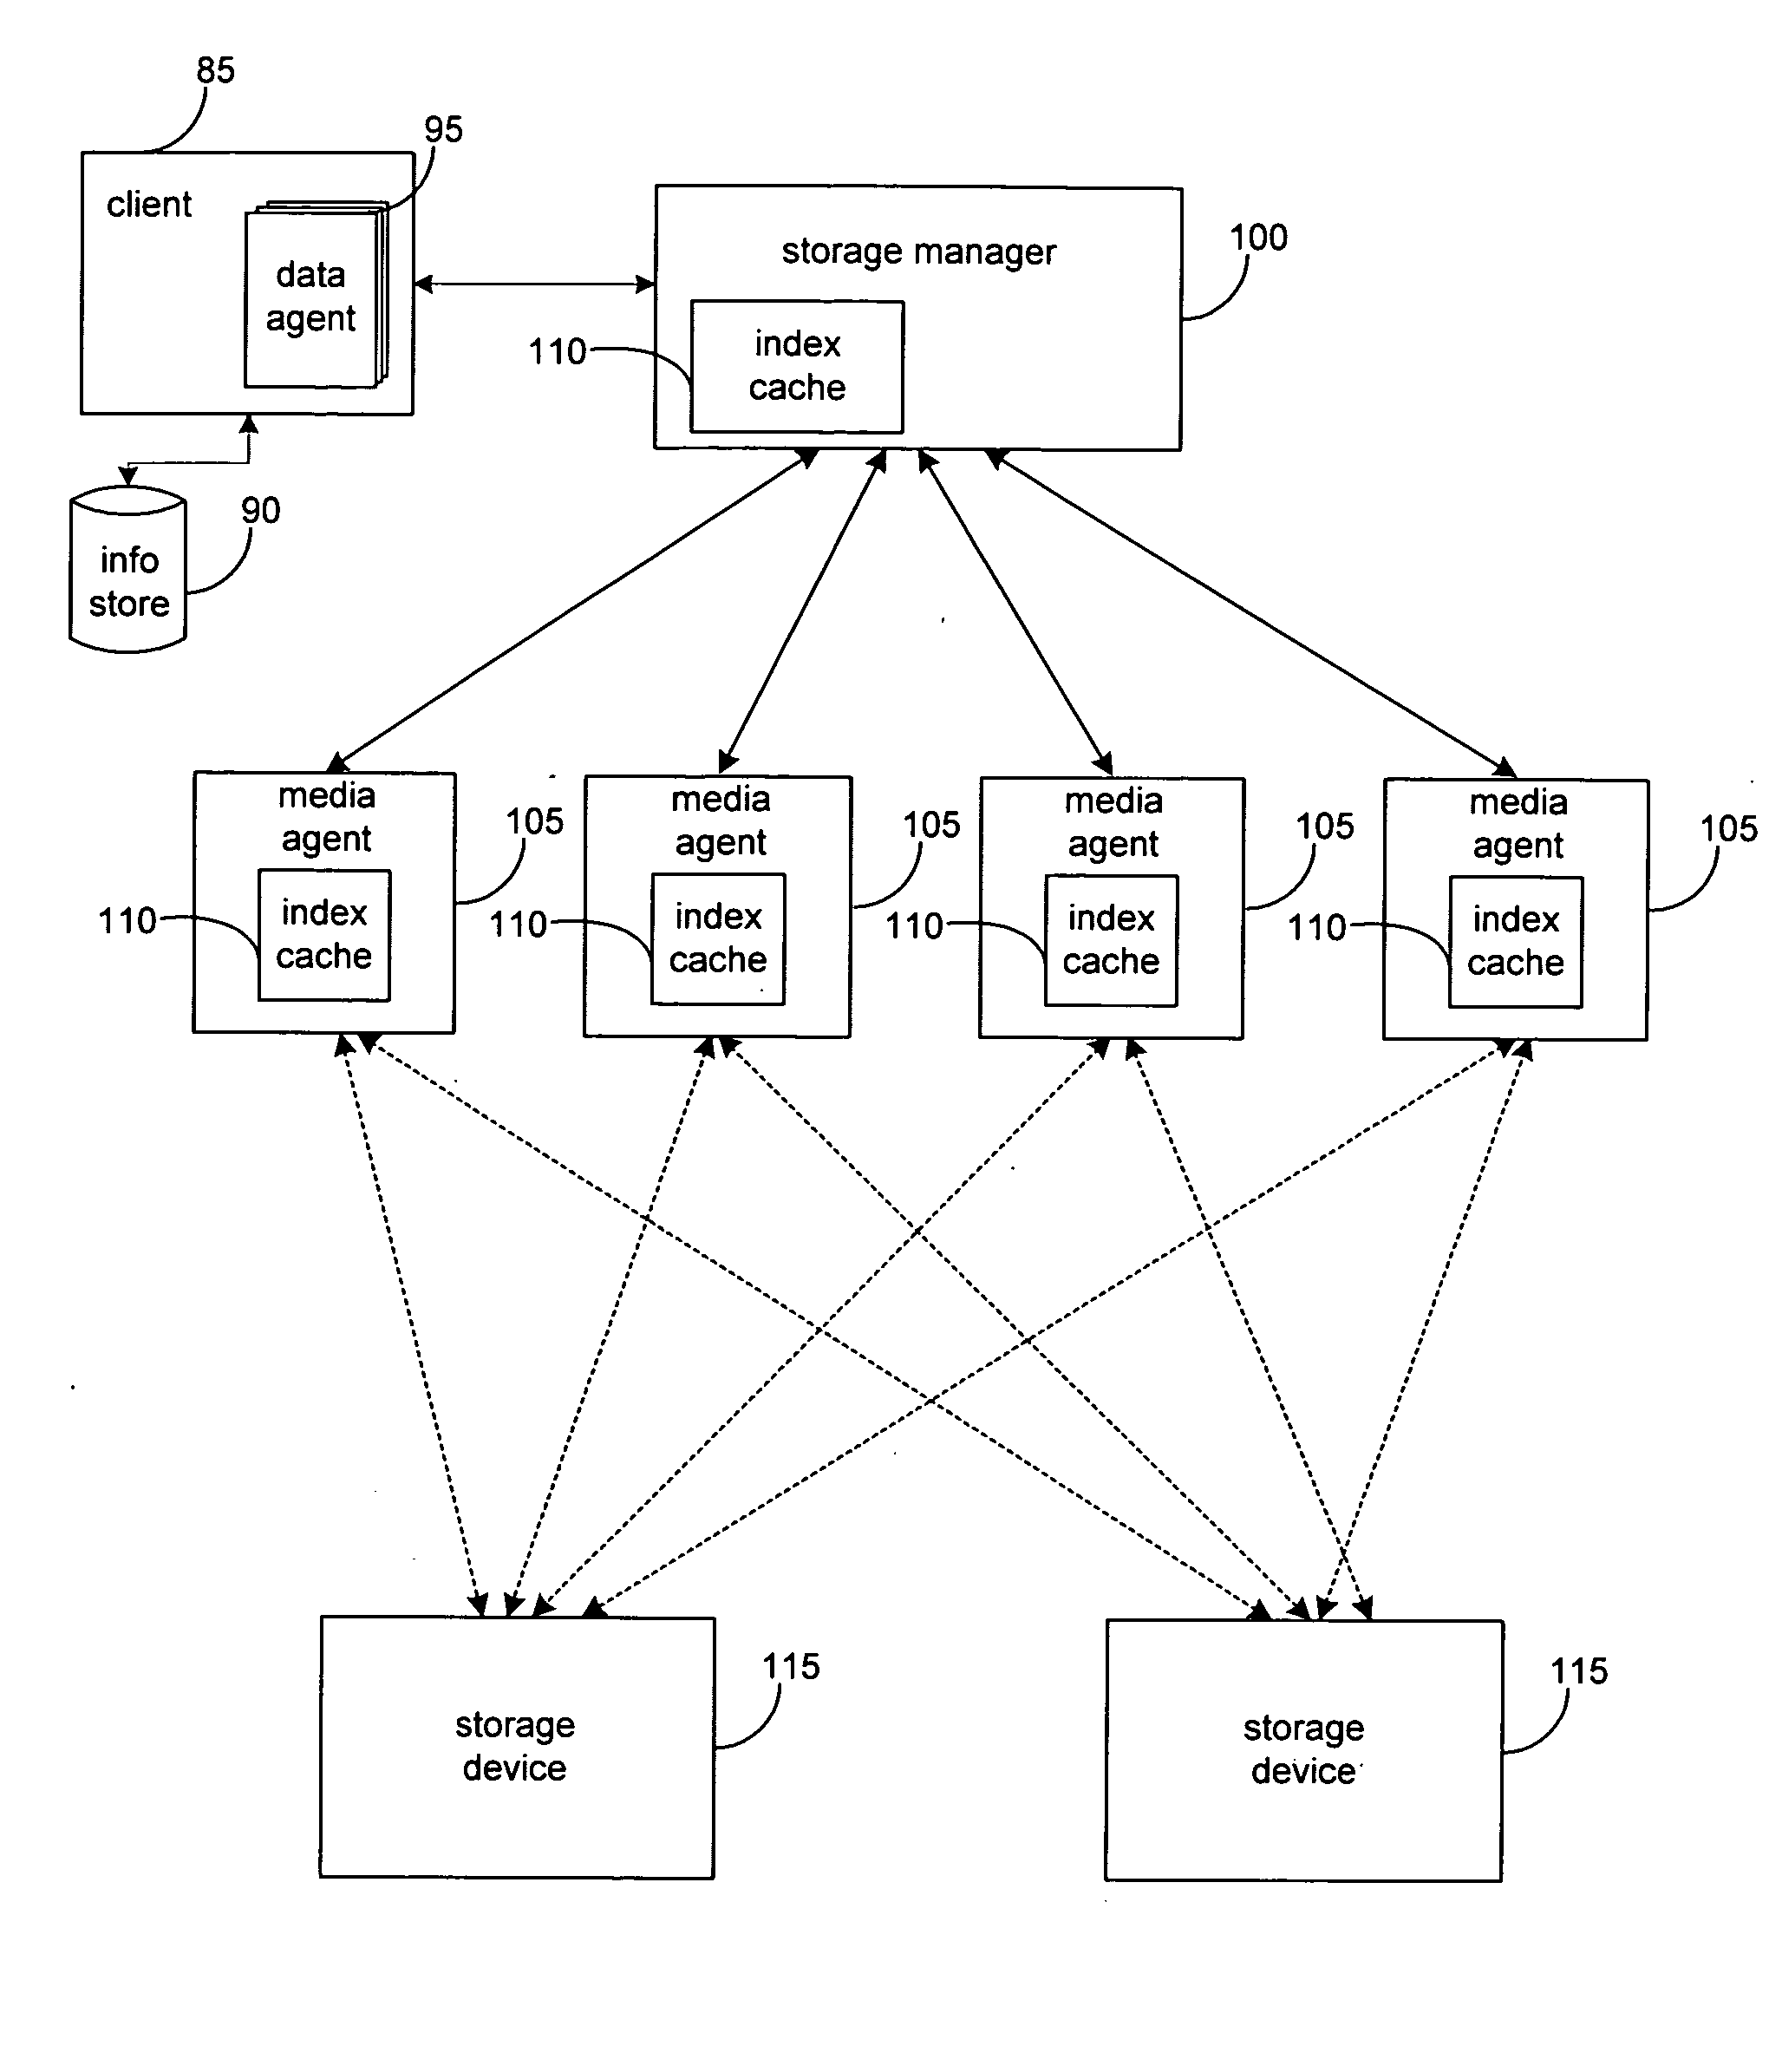 System and method for dynamically sharing storage volumes in a computer network